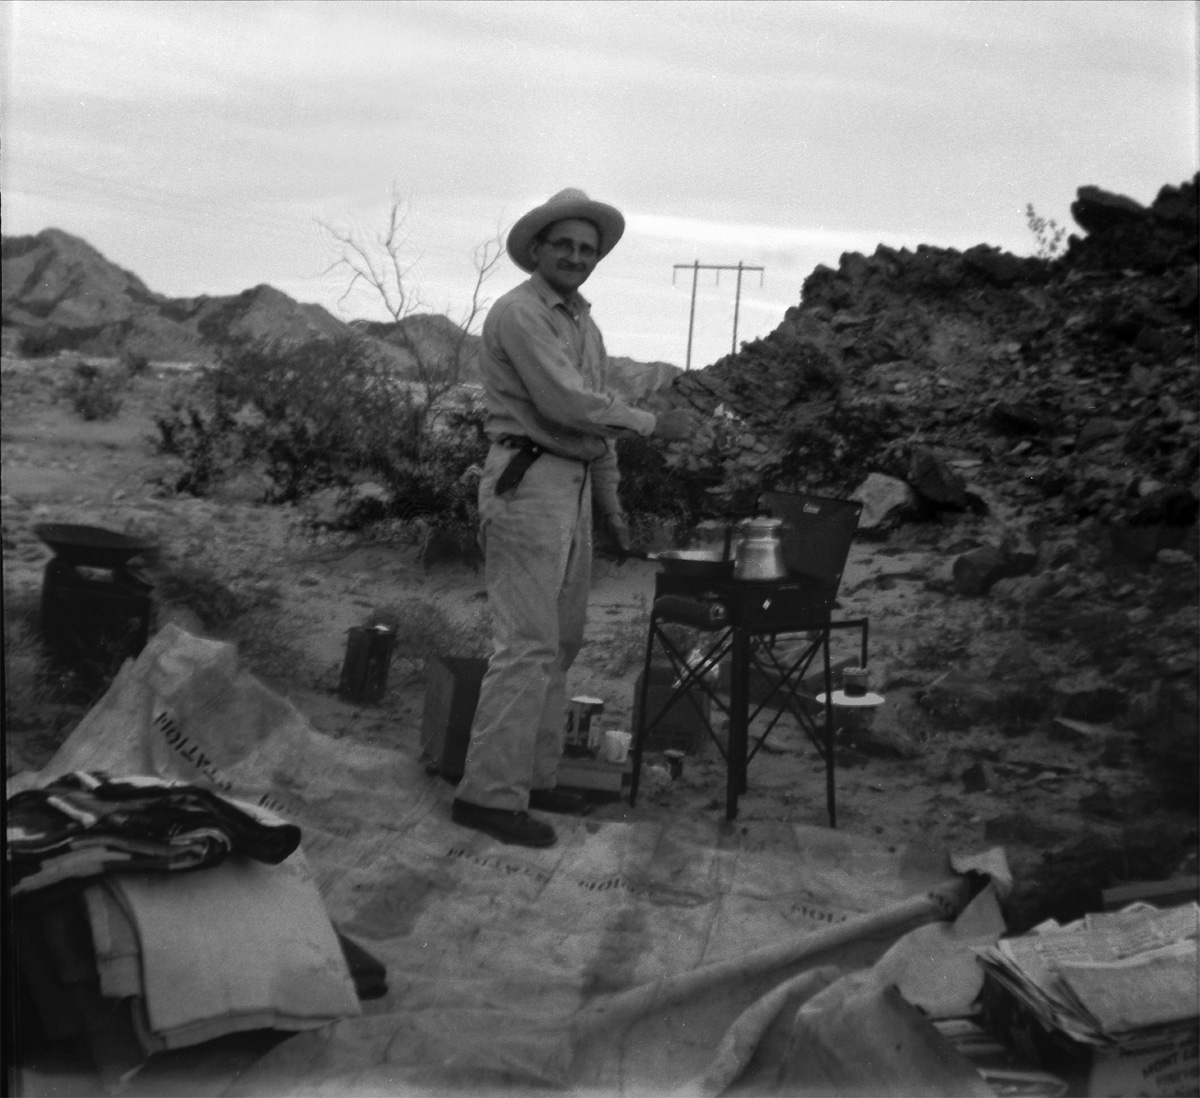 This is my great grandpa out camping. It looks like he's cooking up a steak on the Coleman stove. I don't know the location but I'd guess it's somewhere in the deserts of California. This was taken sometime in the '50s. View full size.

Scanned from a Kodak safety negative.